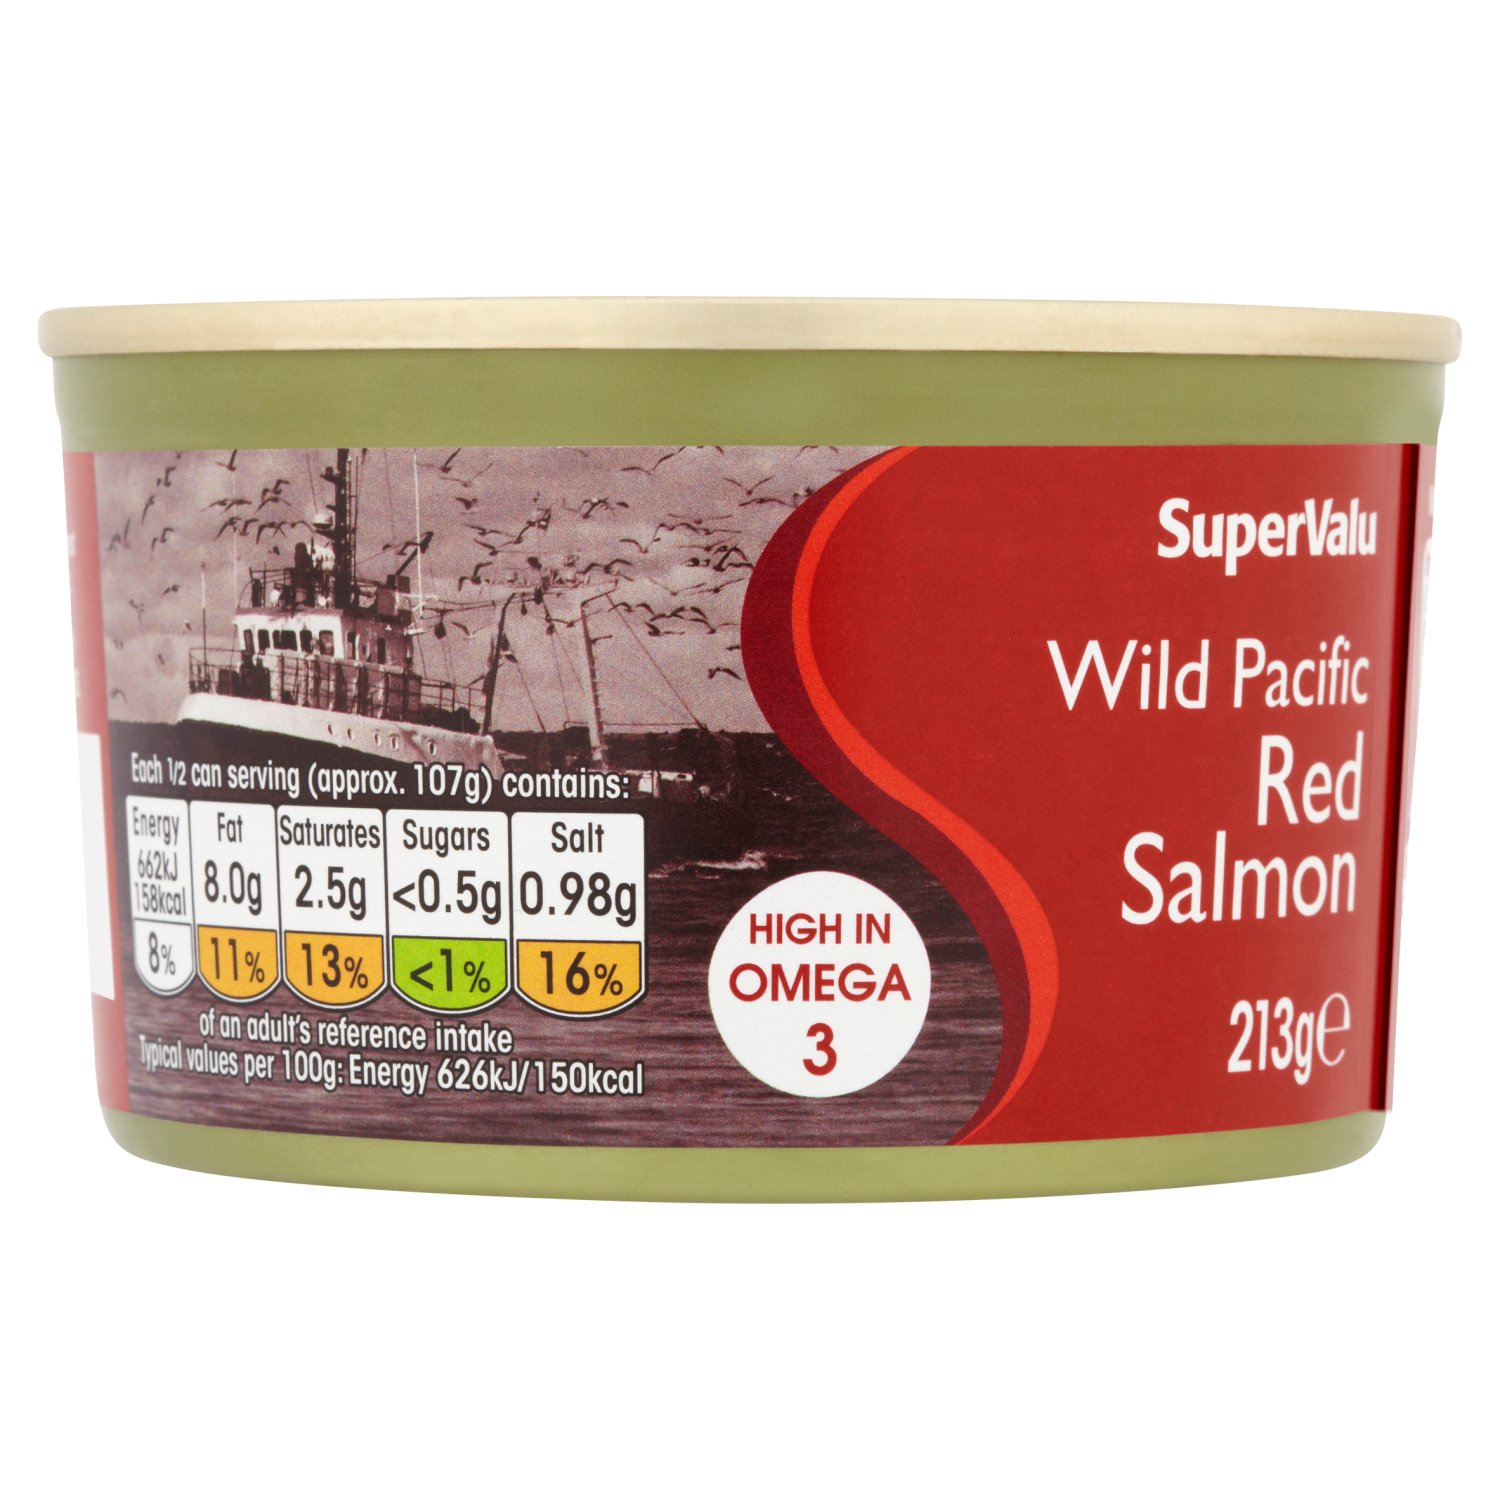 SuperValu Wild Pacific Red Salmon (213 g)